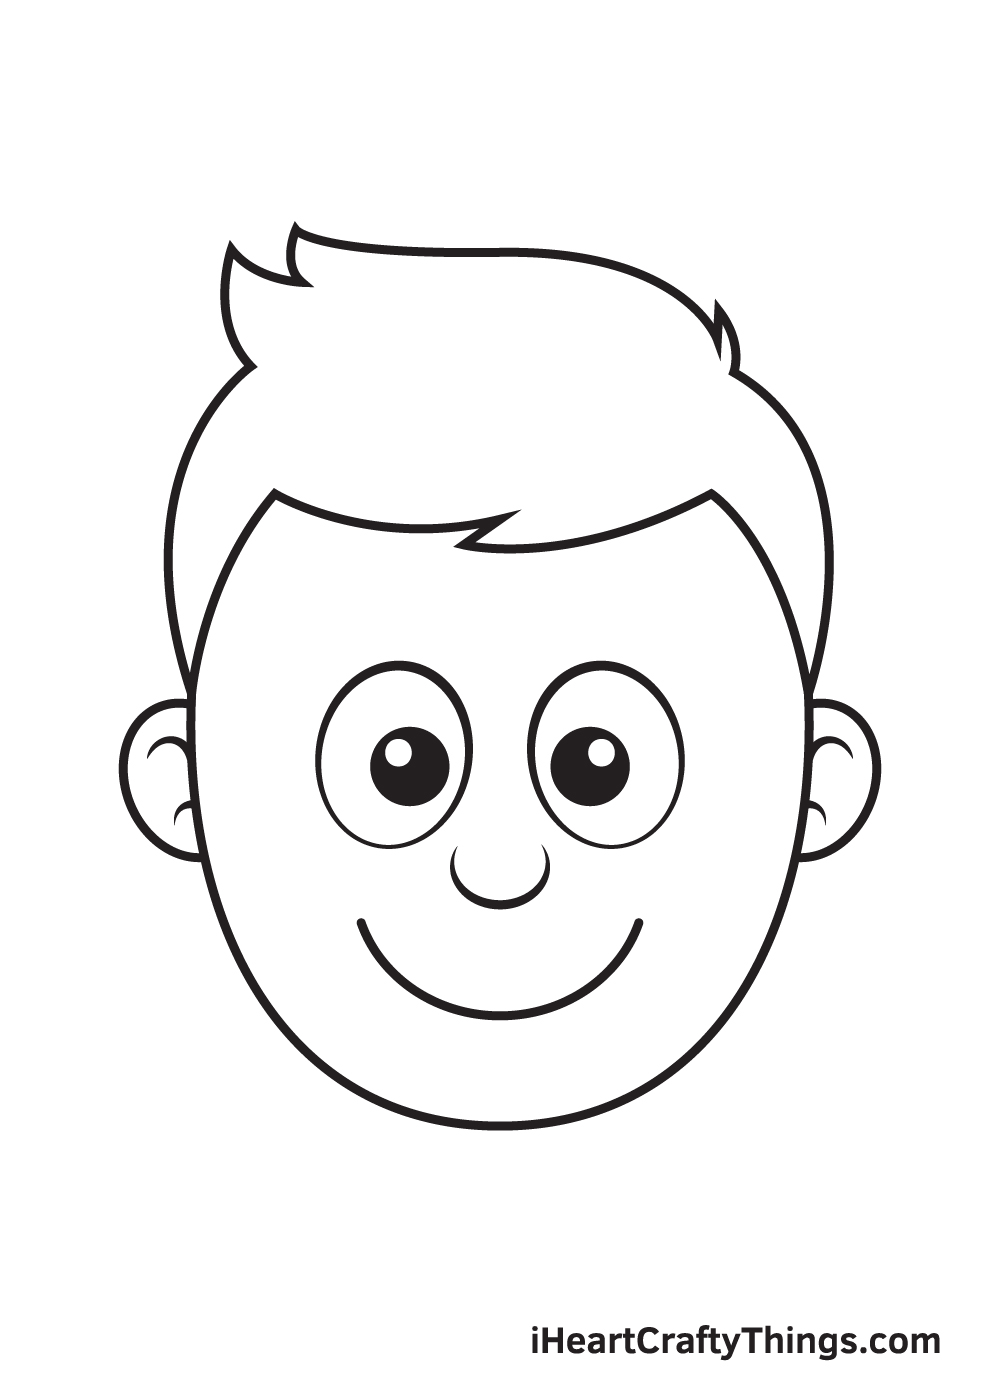 Cartoon Face Drawing - How To Draw A Cartoon Face Step By Step